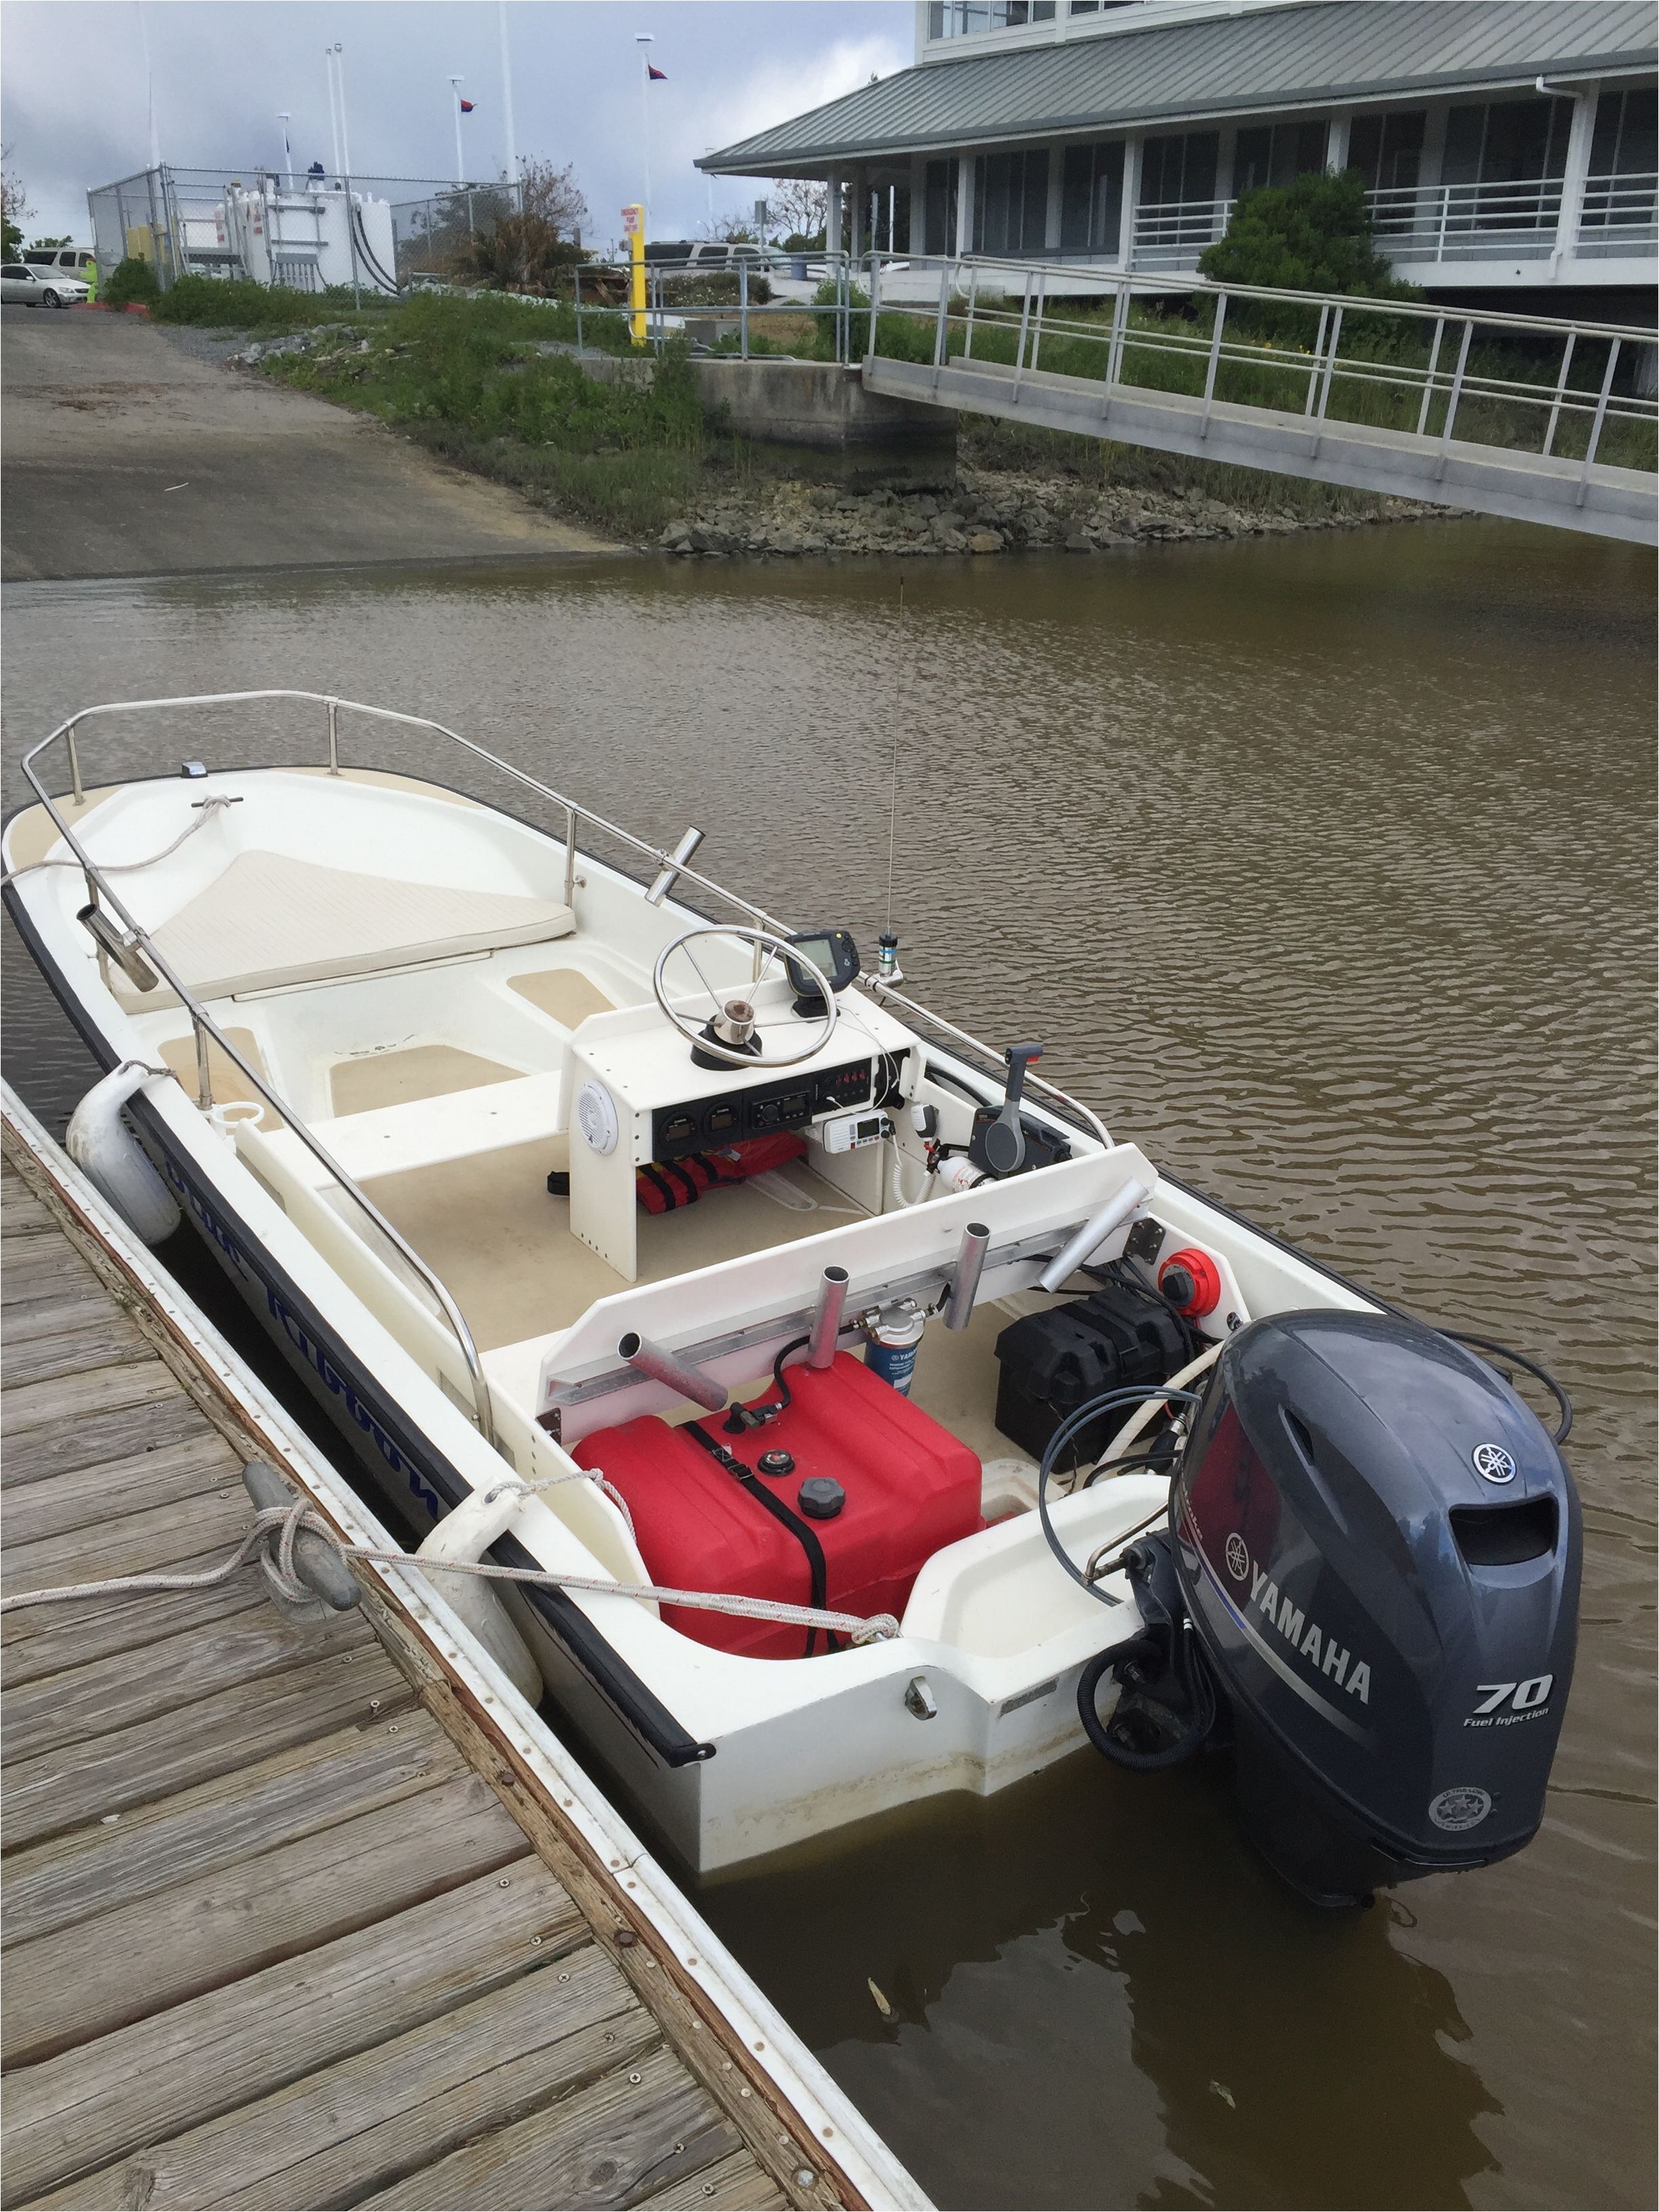 1978 15 boston whaler super sport retrofitted with a custom king starboard interior fabricated by sonoma boatworks